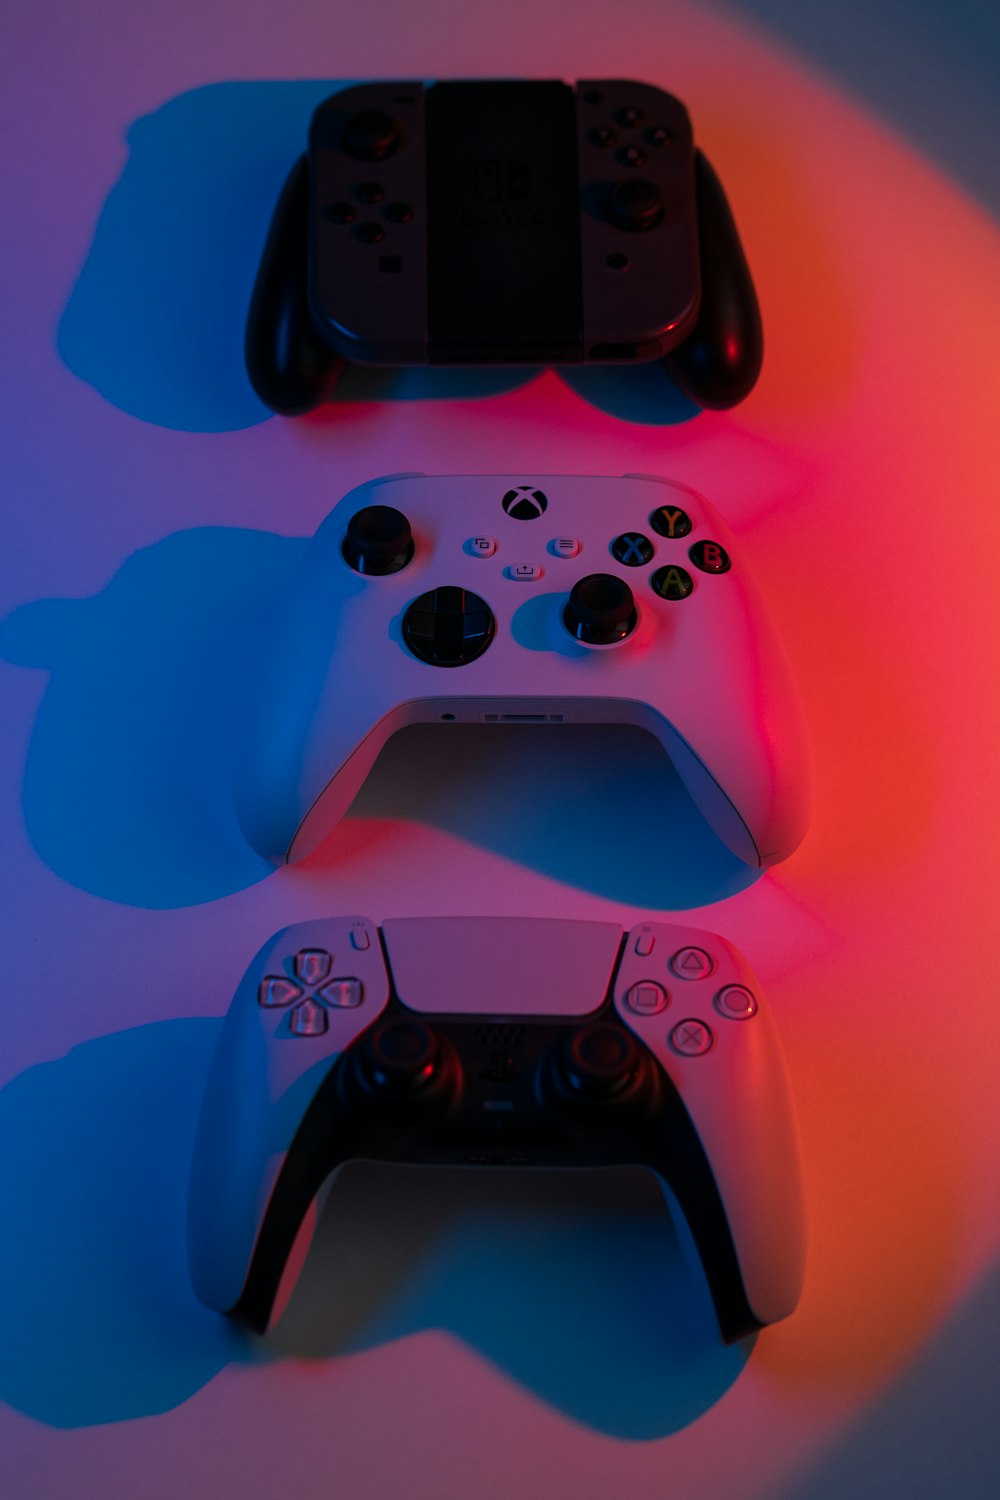 two video game controllers sitting next to each other